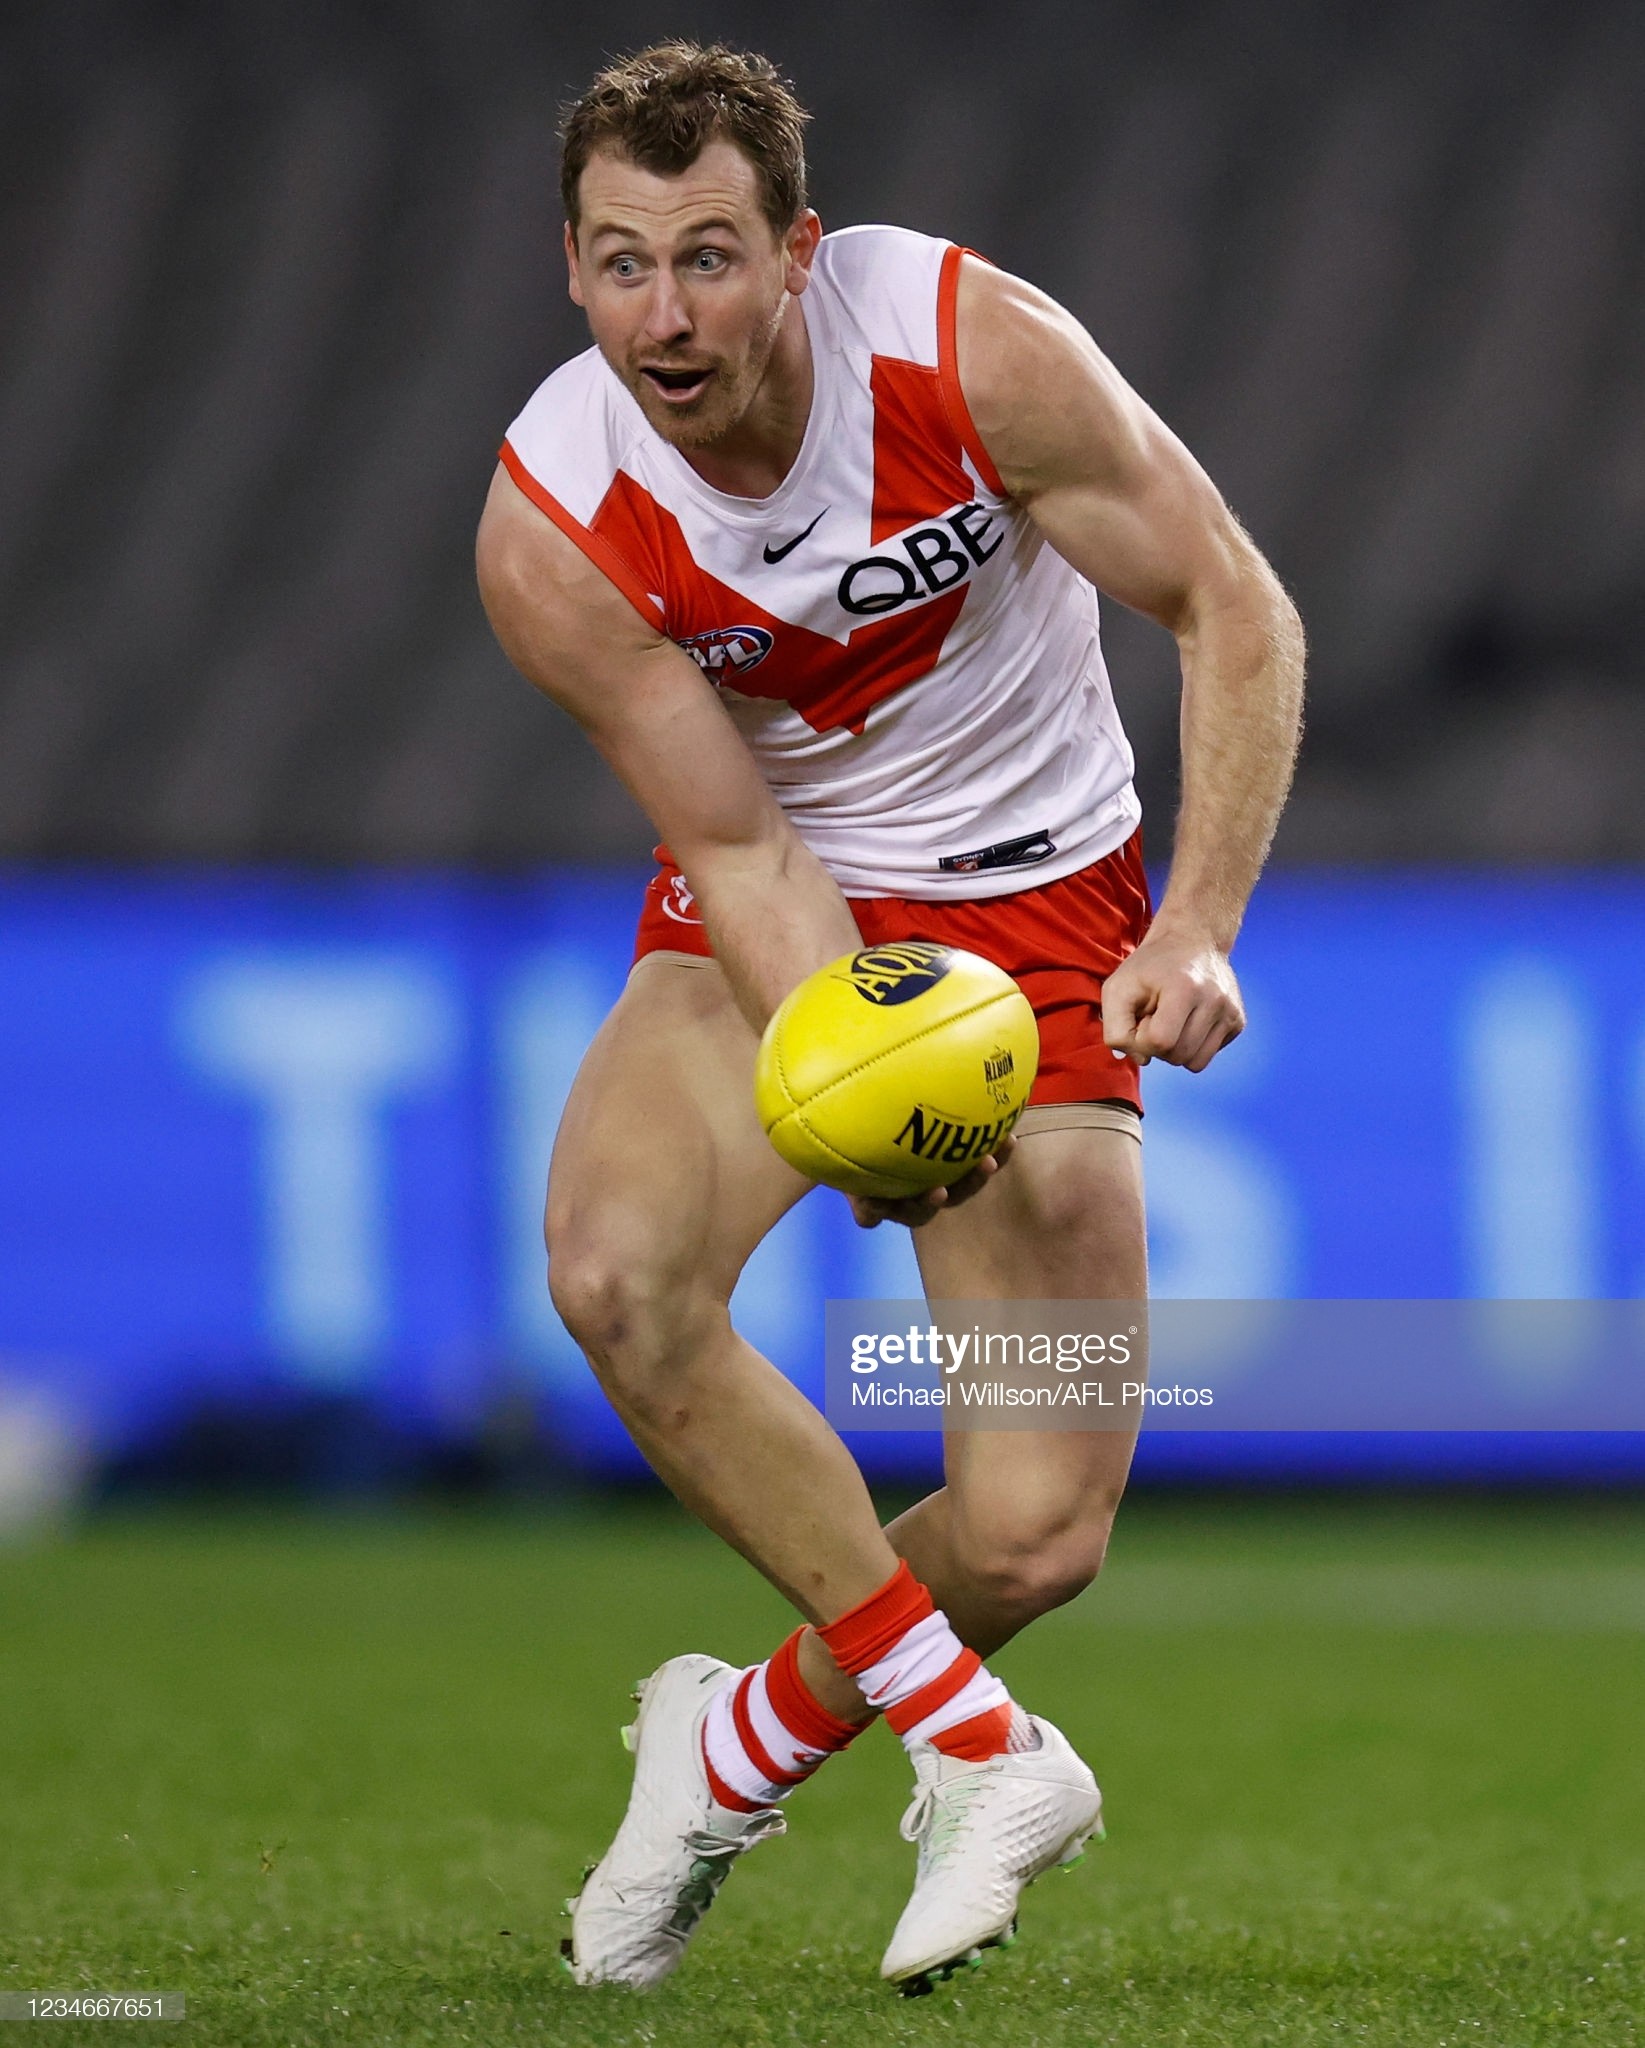 harry-cunningham-of-the-swans-in-action-during-the-2021-afl-round-22-picture-id1234667651